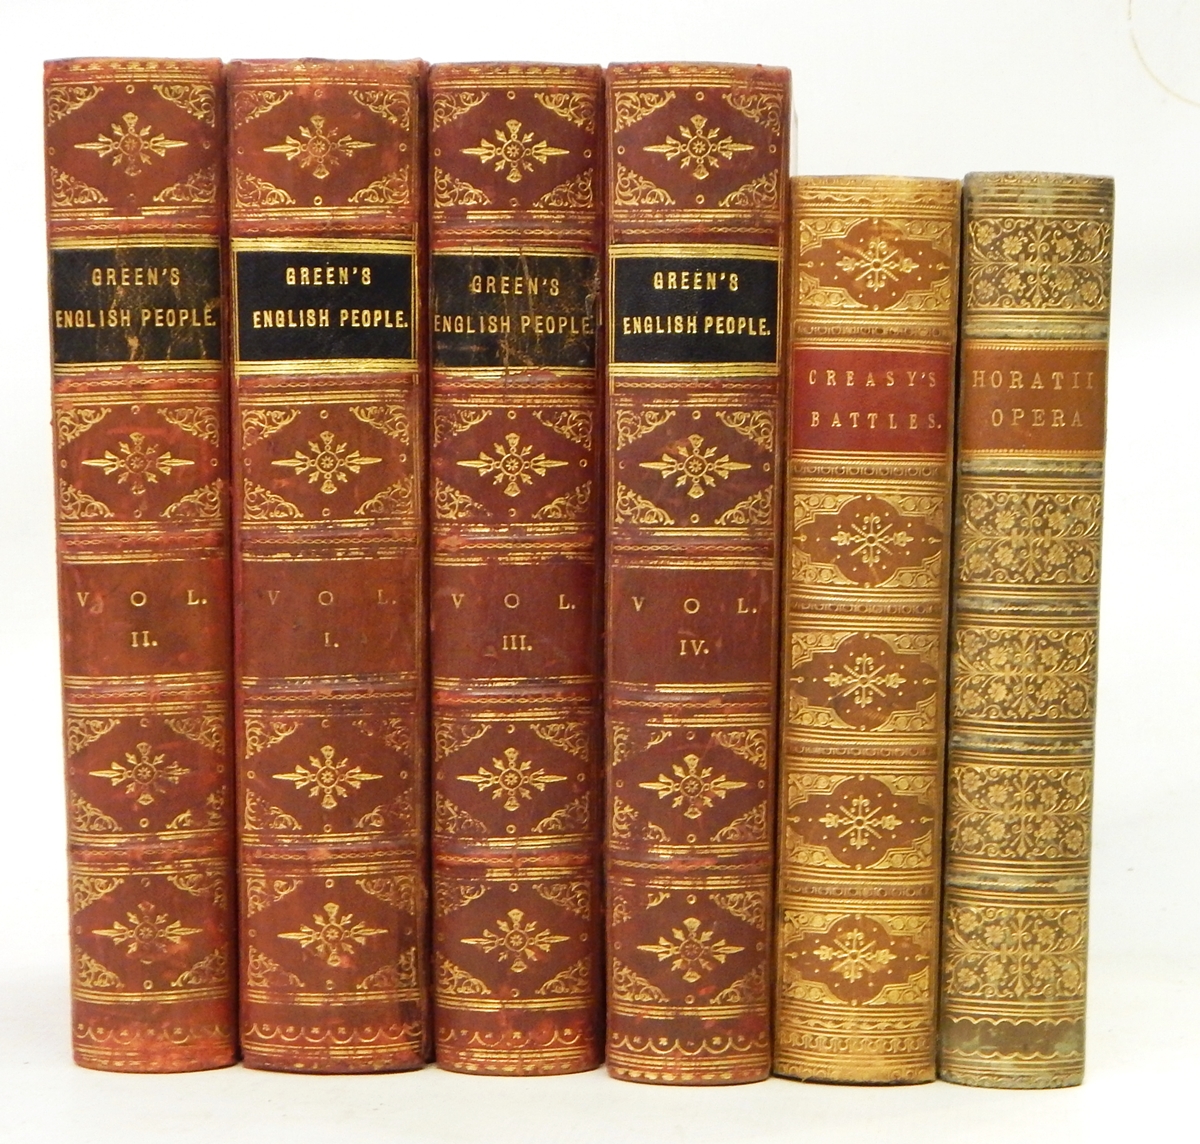 Green, J R "A Short History of the English People", MacMillan & Co 1902, 4 vols, full red leather,